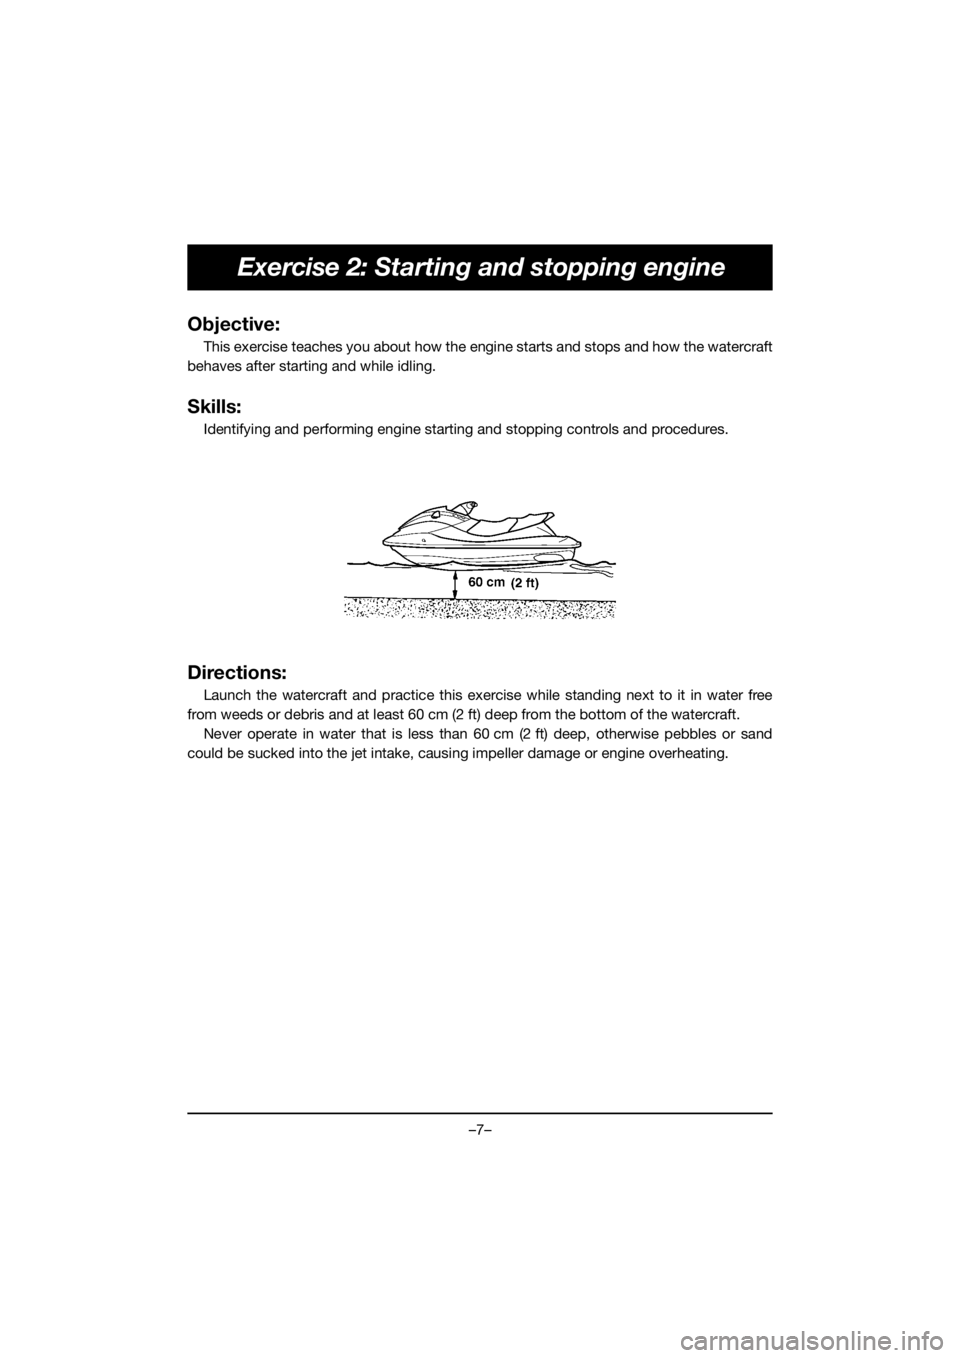 YAMAHA FJR1300 2020 User Guide –7–
Exercise 2: Starting and stopping engine
Objective:
This exercise teaches you about how the engine starts and stops and how the watercraft
behaves after starting and while idling.
Skills:
Iden